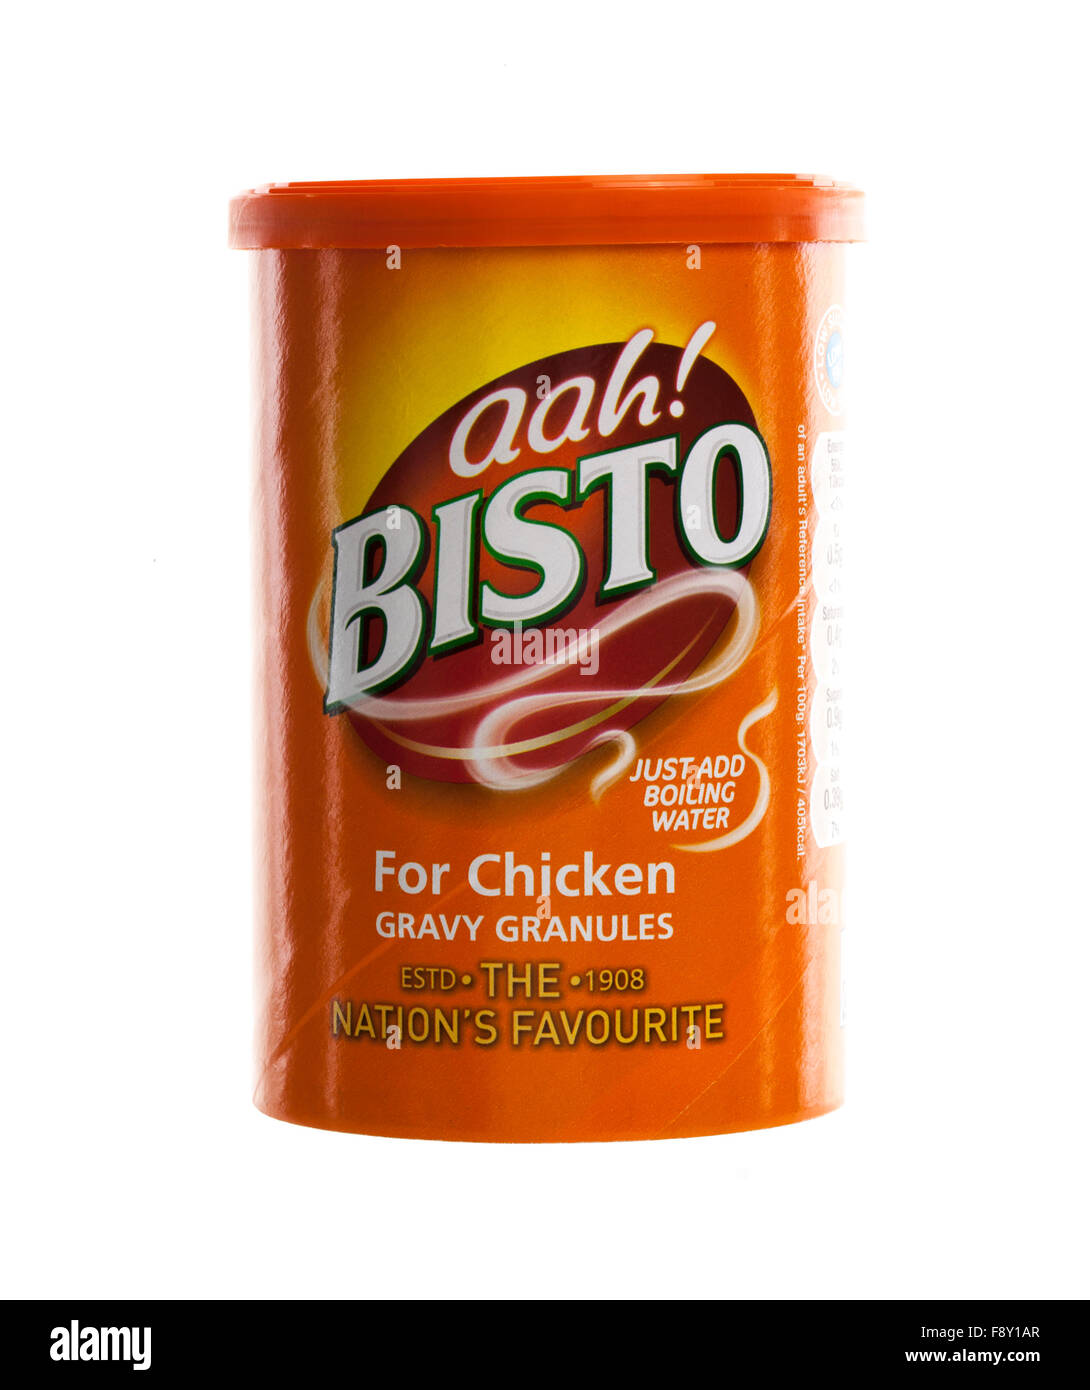 Bistow Gravy Granules for Chicken on a white background Stock Photo